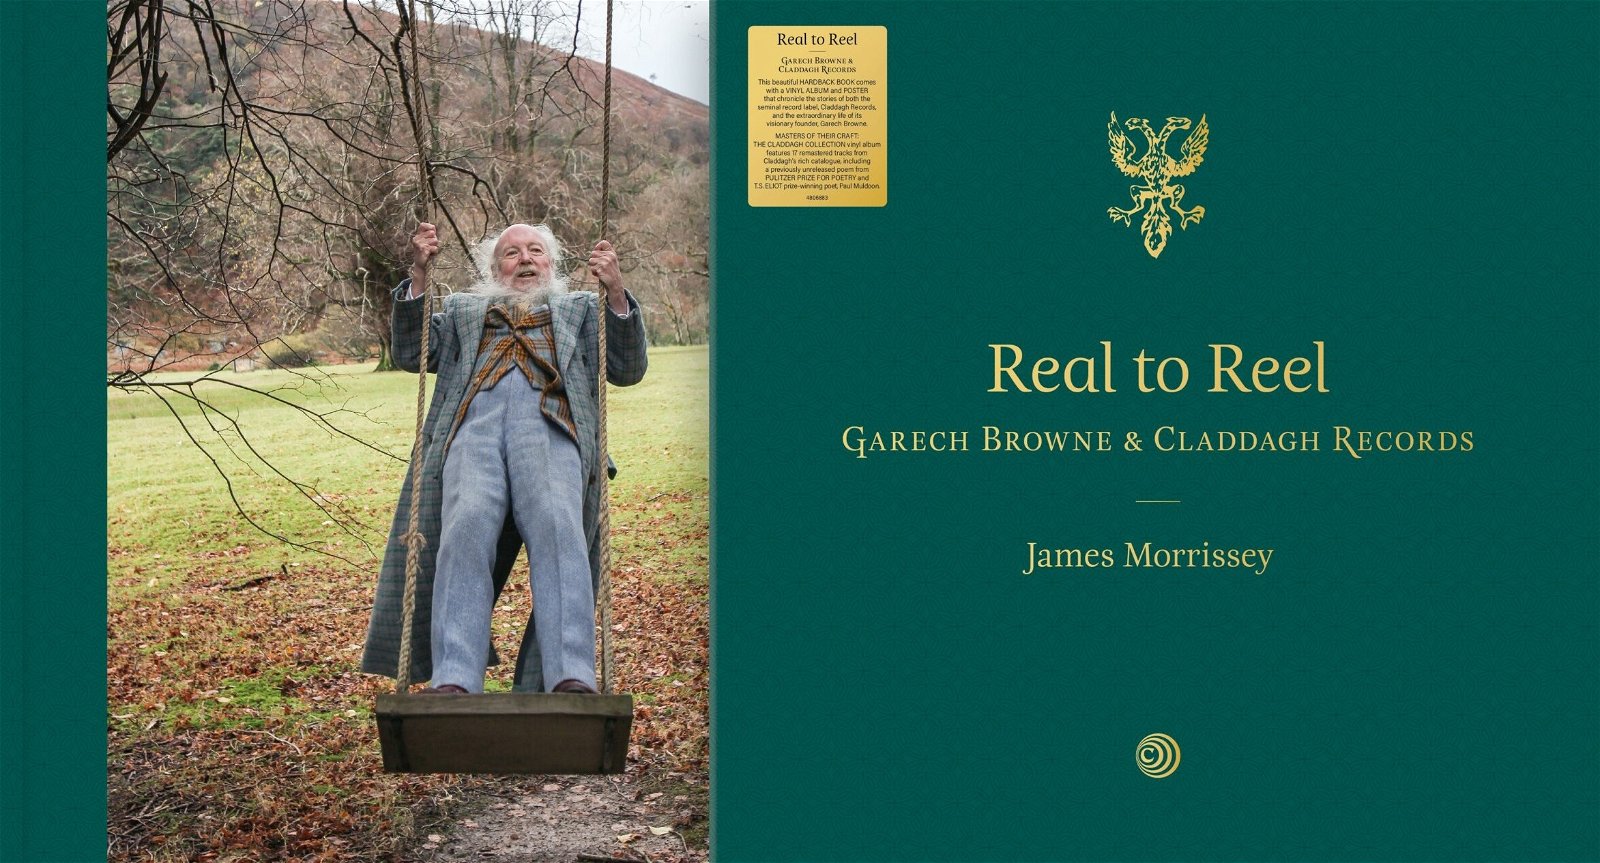 CD Shop - MORRISSEY, JAMES REAL TO REEL: GARECH BROWNE AND CLADDAGH RECORDS